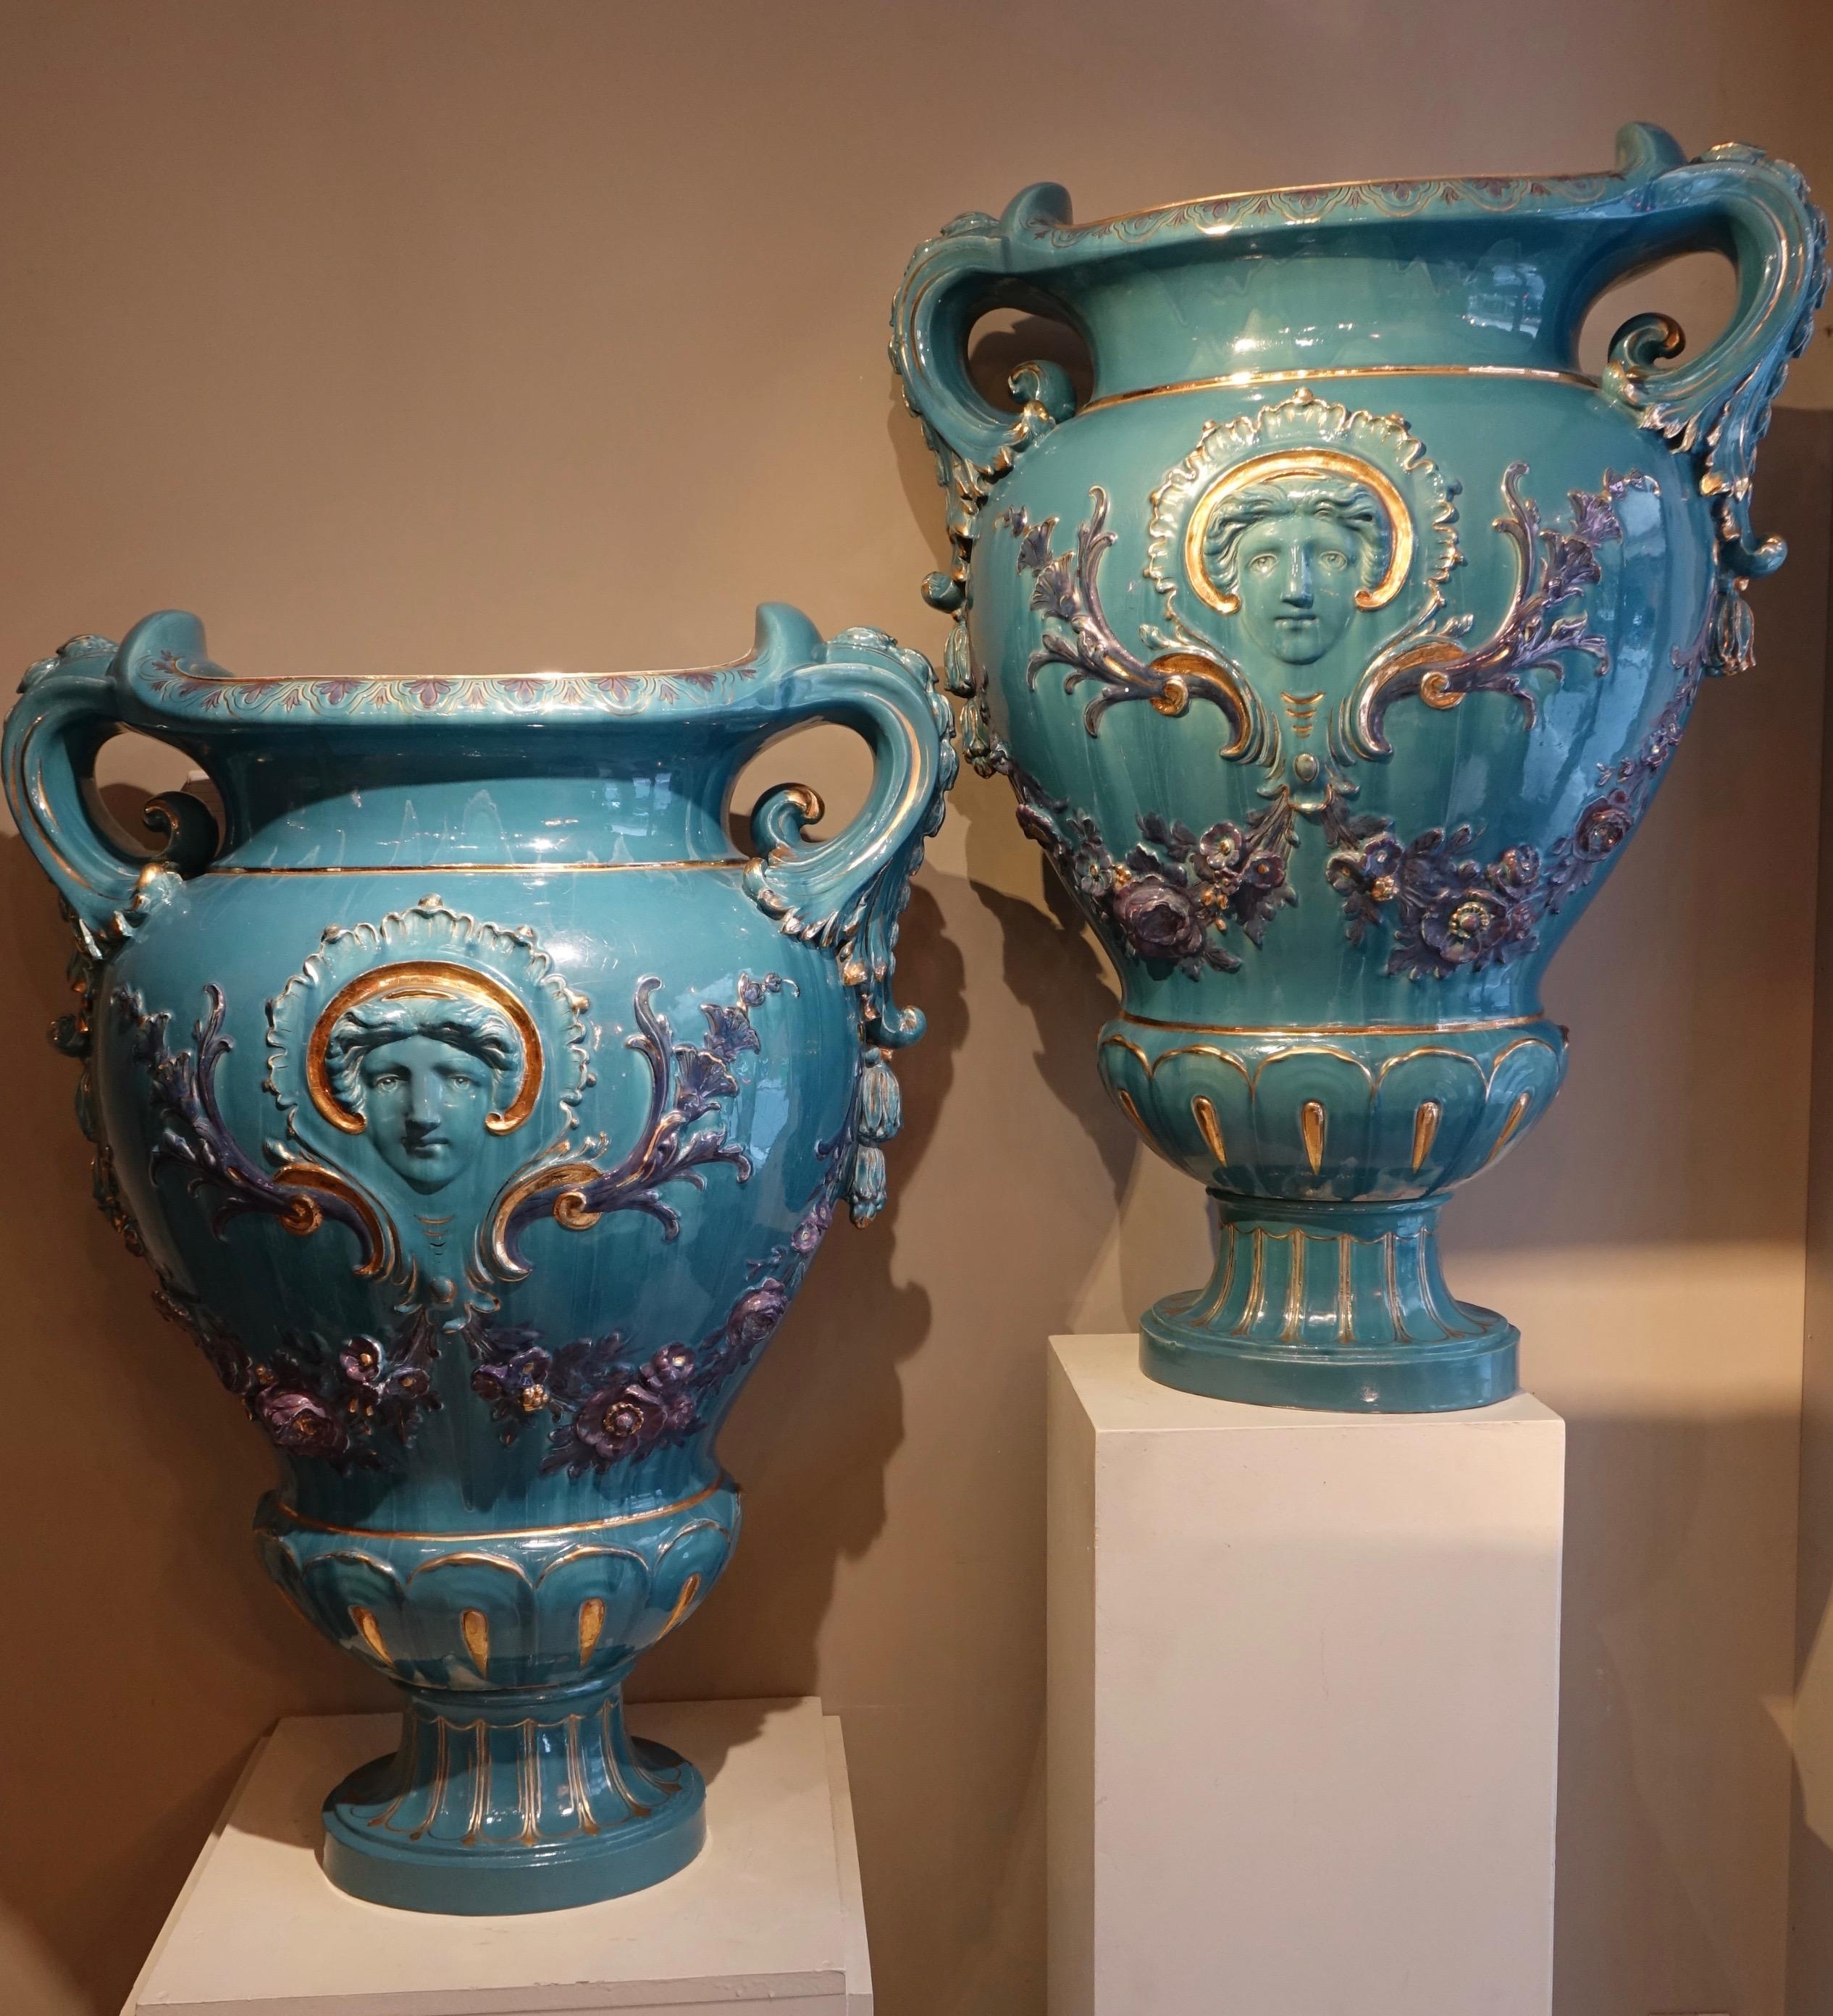 Pair of large Medicis vases in blue-green earthenware with acanthus leaf-shaped handles.
Decorated on the four sides, mascarons surrounded by foliage scrolls and purple flower garlands. The whole is highlighted with gilding giving more depth to the